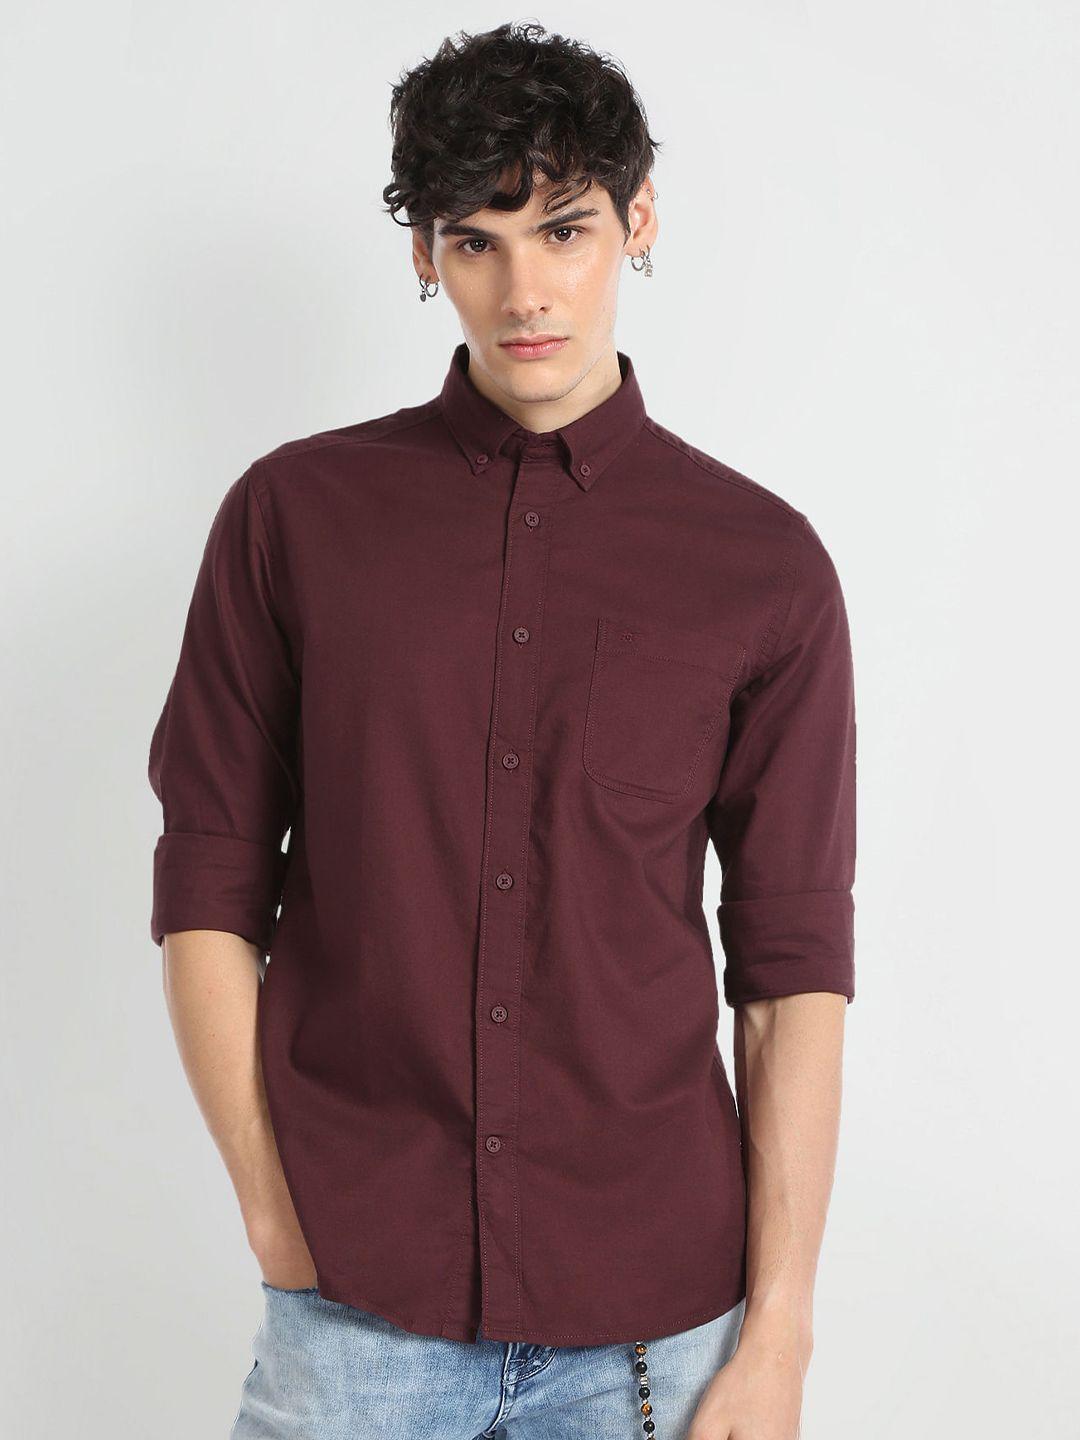 flying-machine-slim-fit-button-down-collar-pure-cotton-casual-shirt